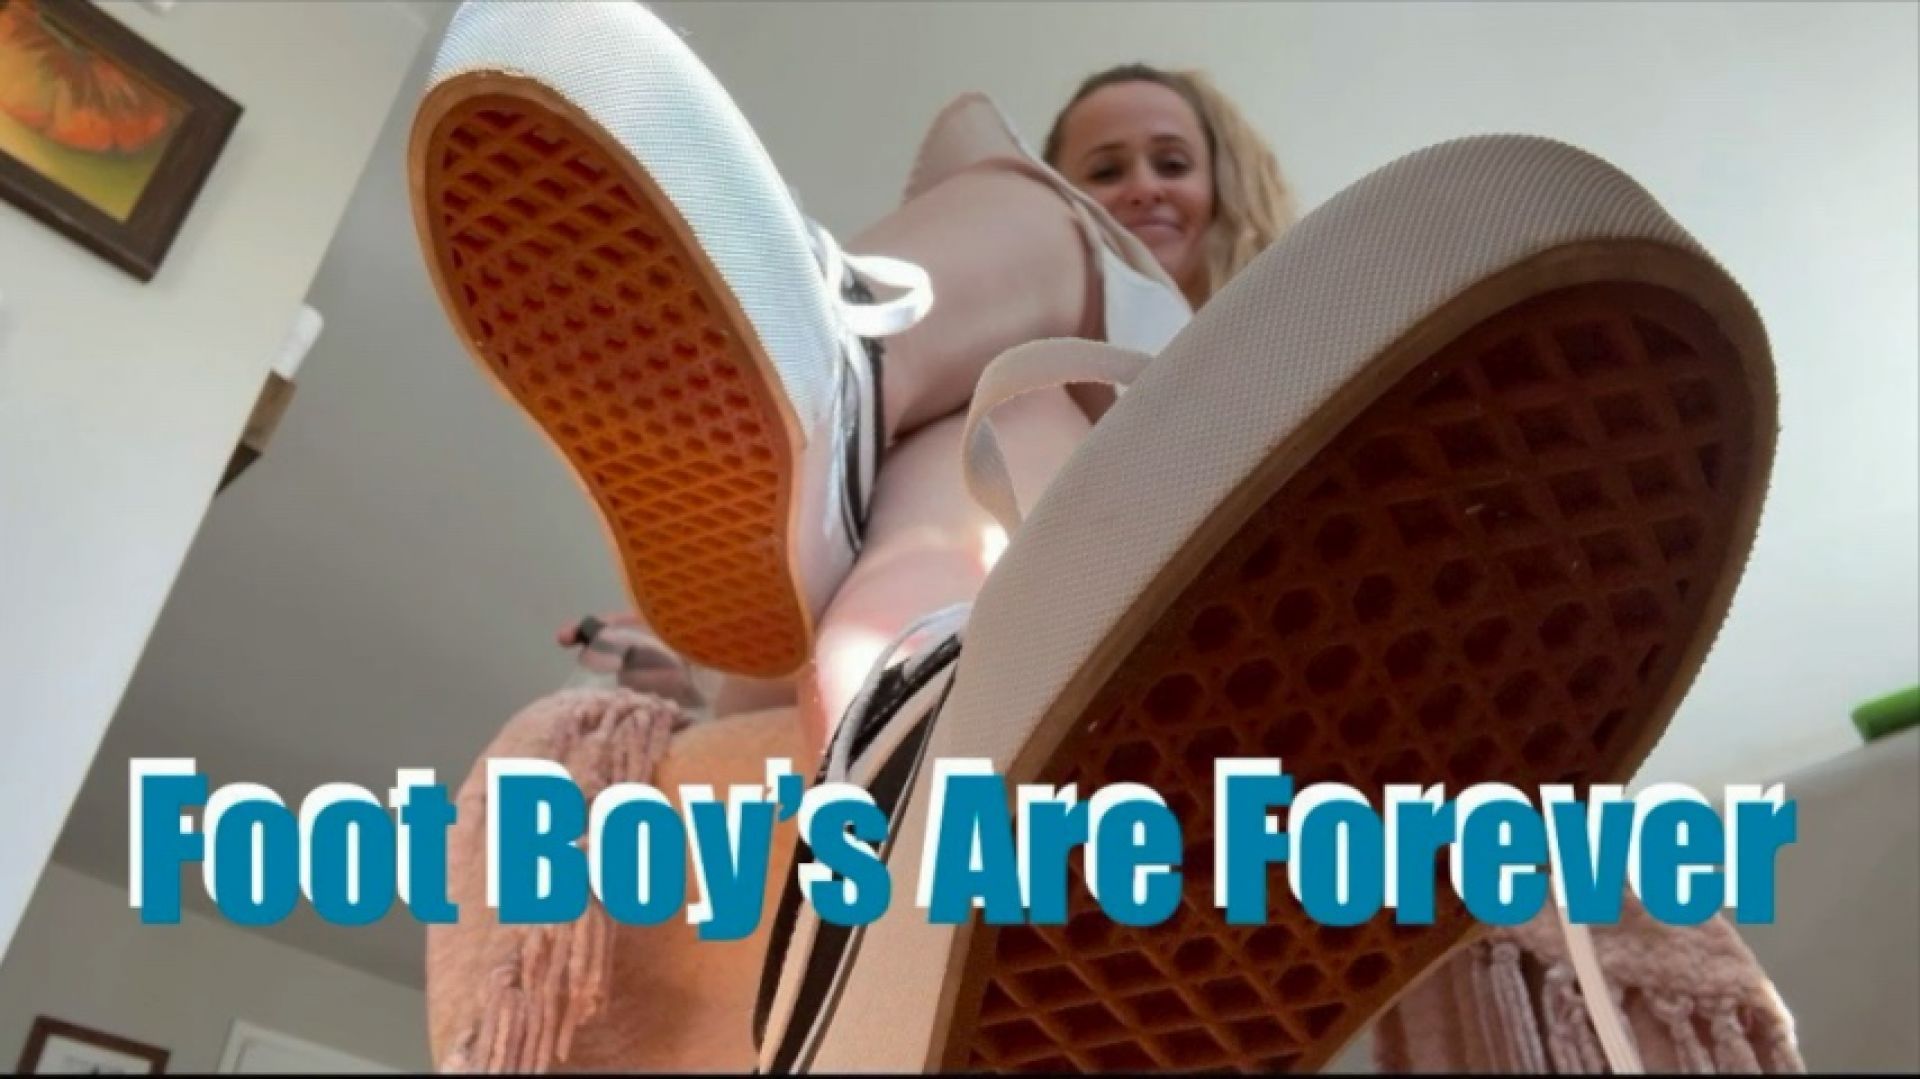 Foot Boy's Are Forever